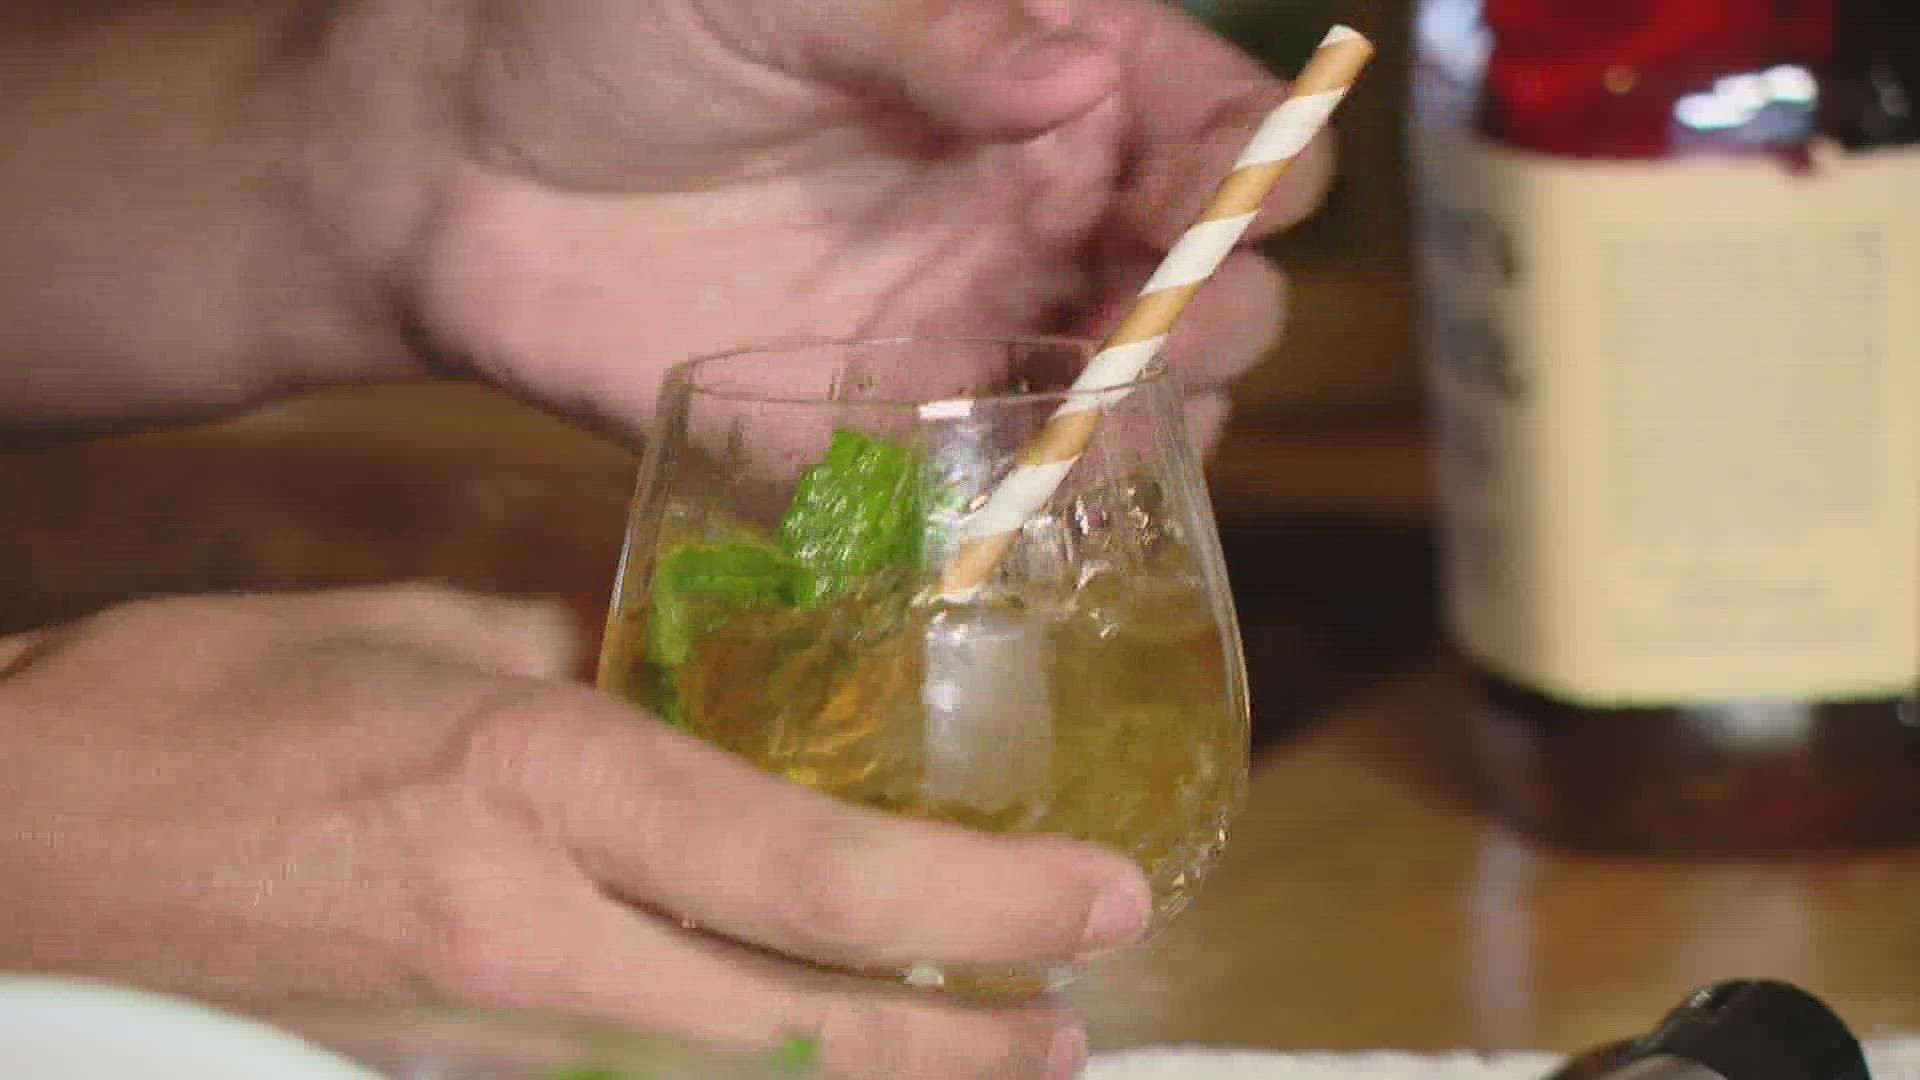 Misty Coolidge joins us to show us how to make a couple of easy cocktails if you're hosting a party.